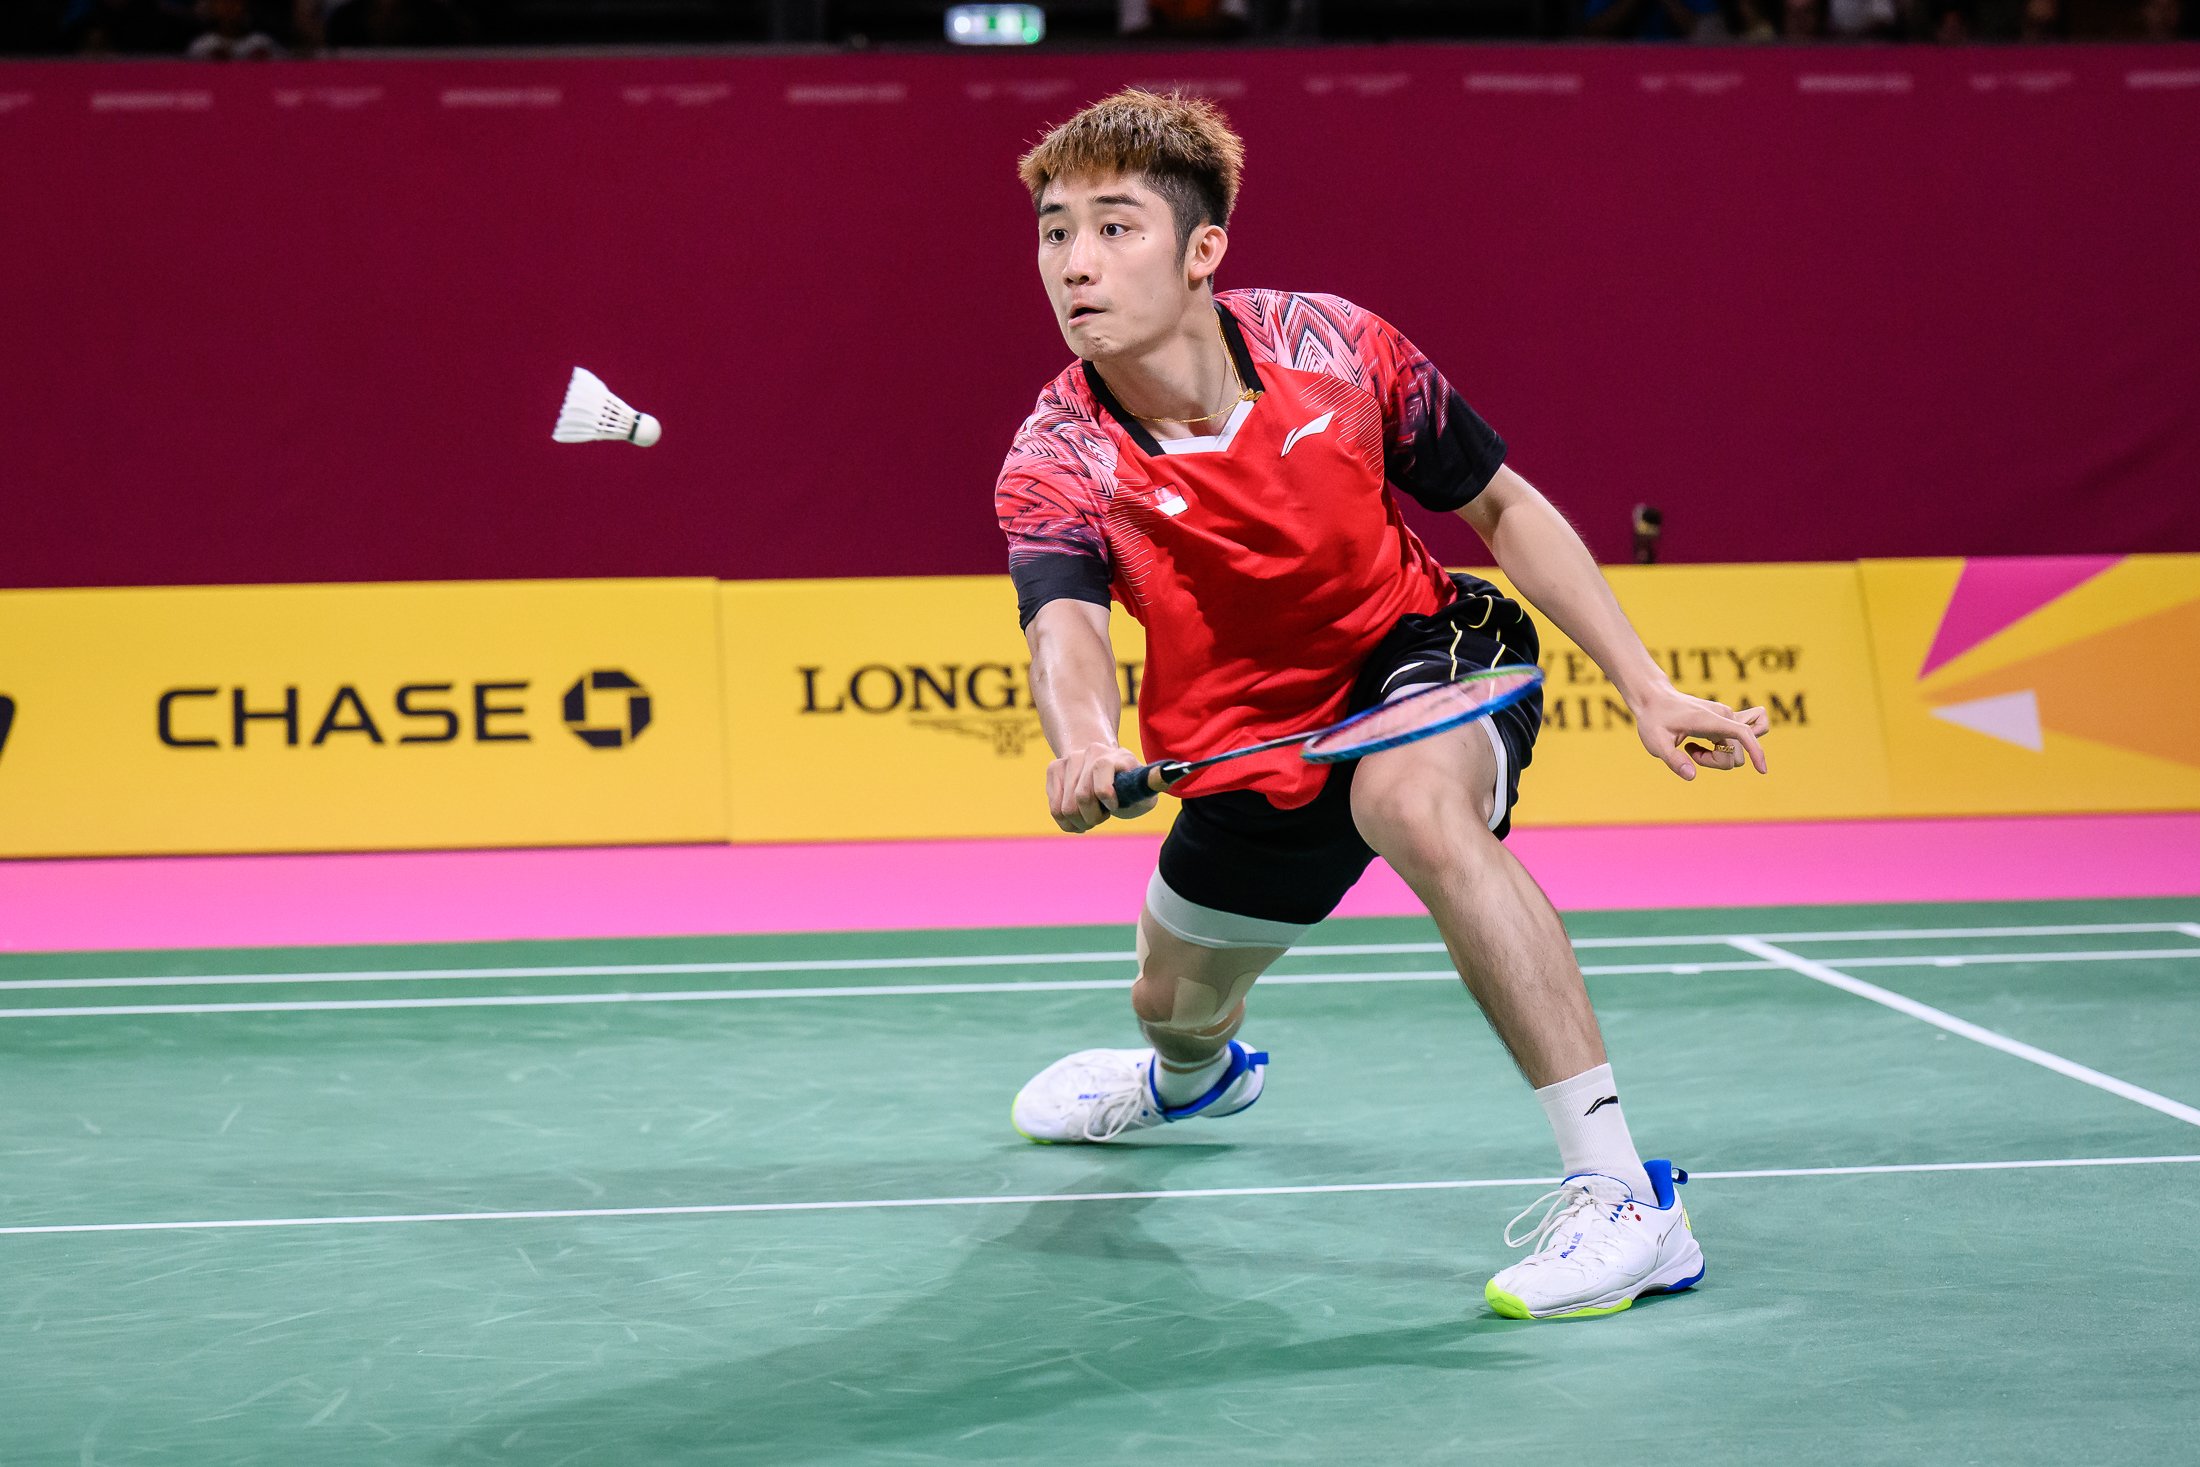 20220807_-_Badminton Photo by Andy Chua_085